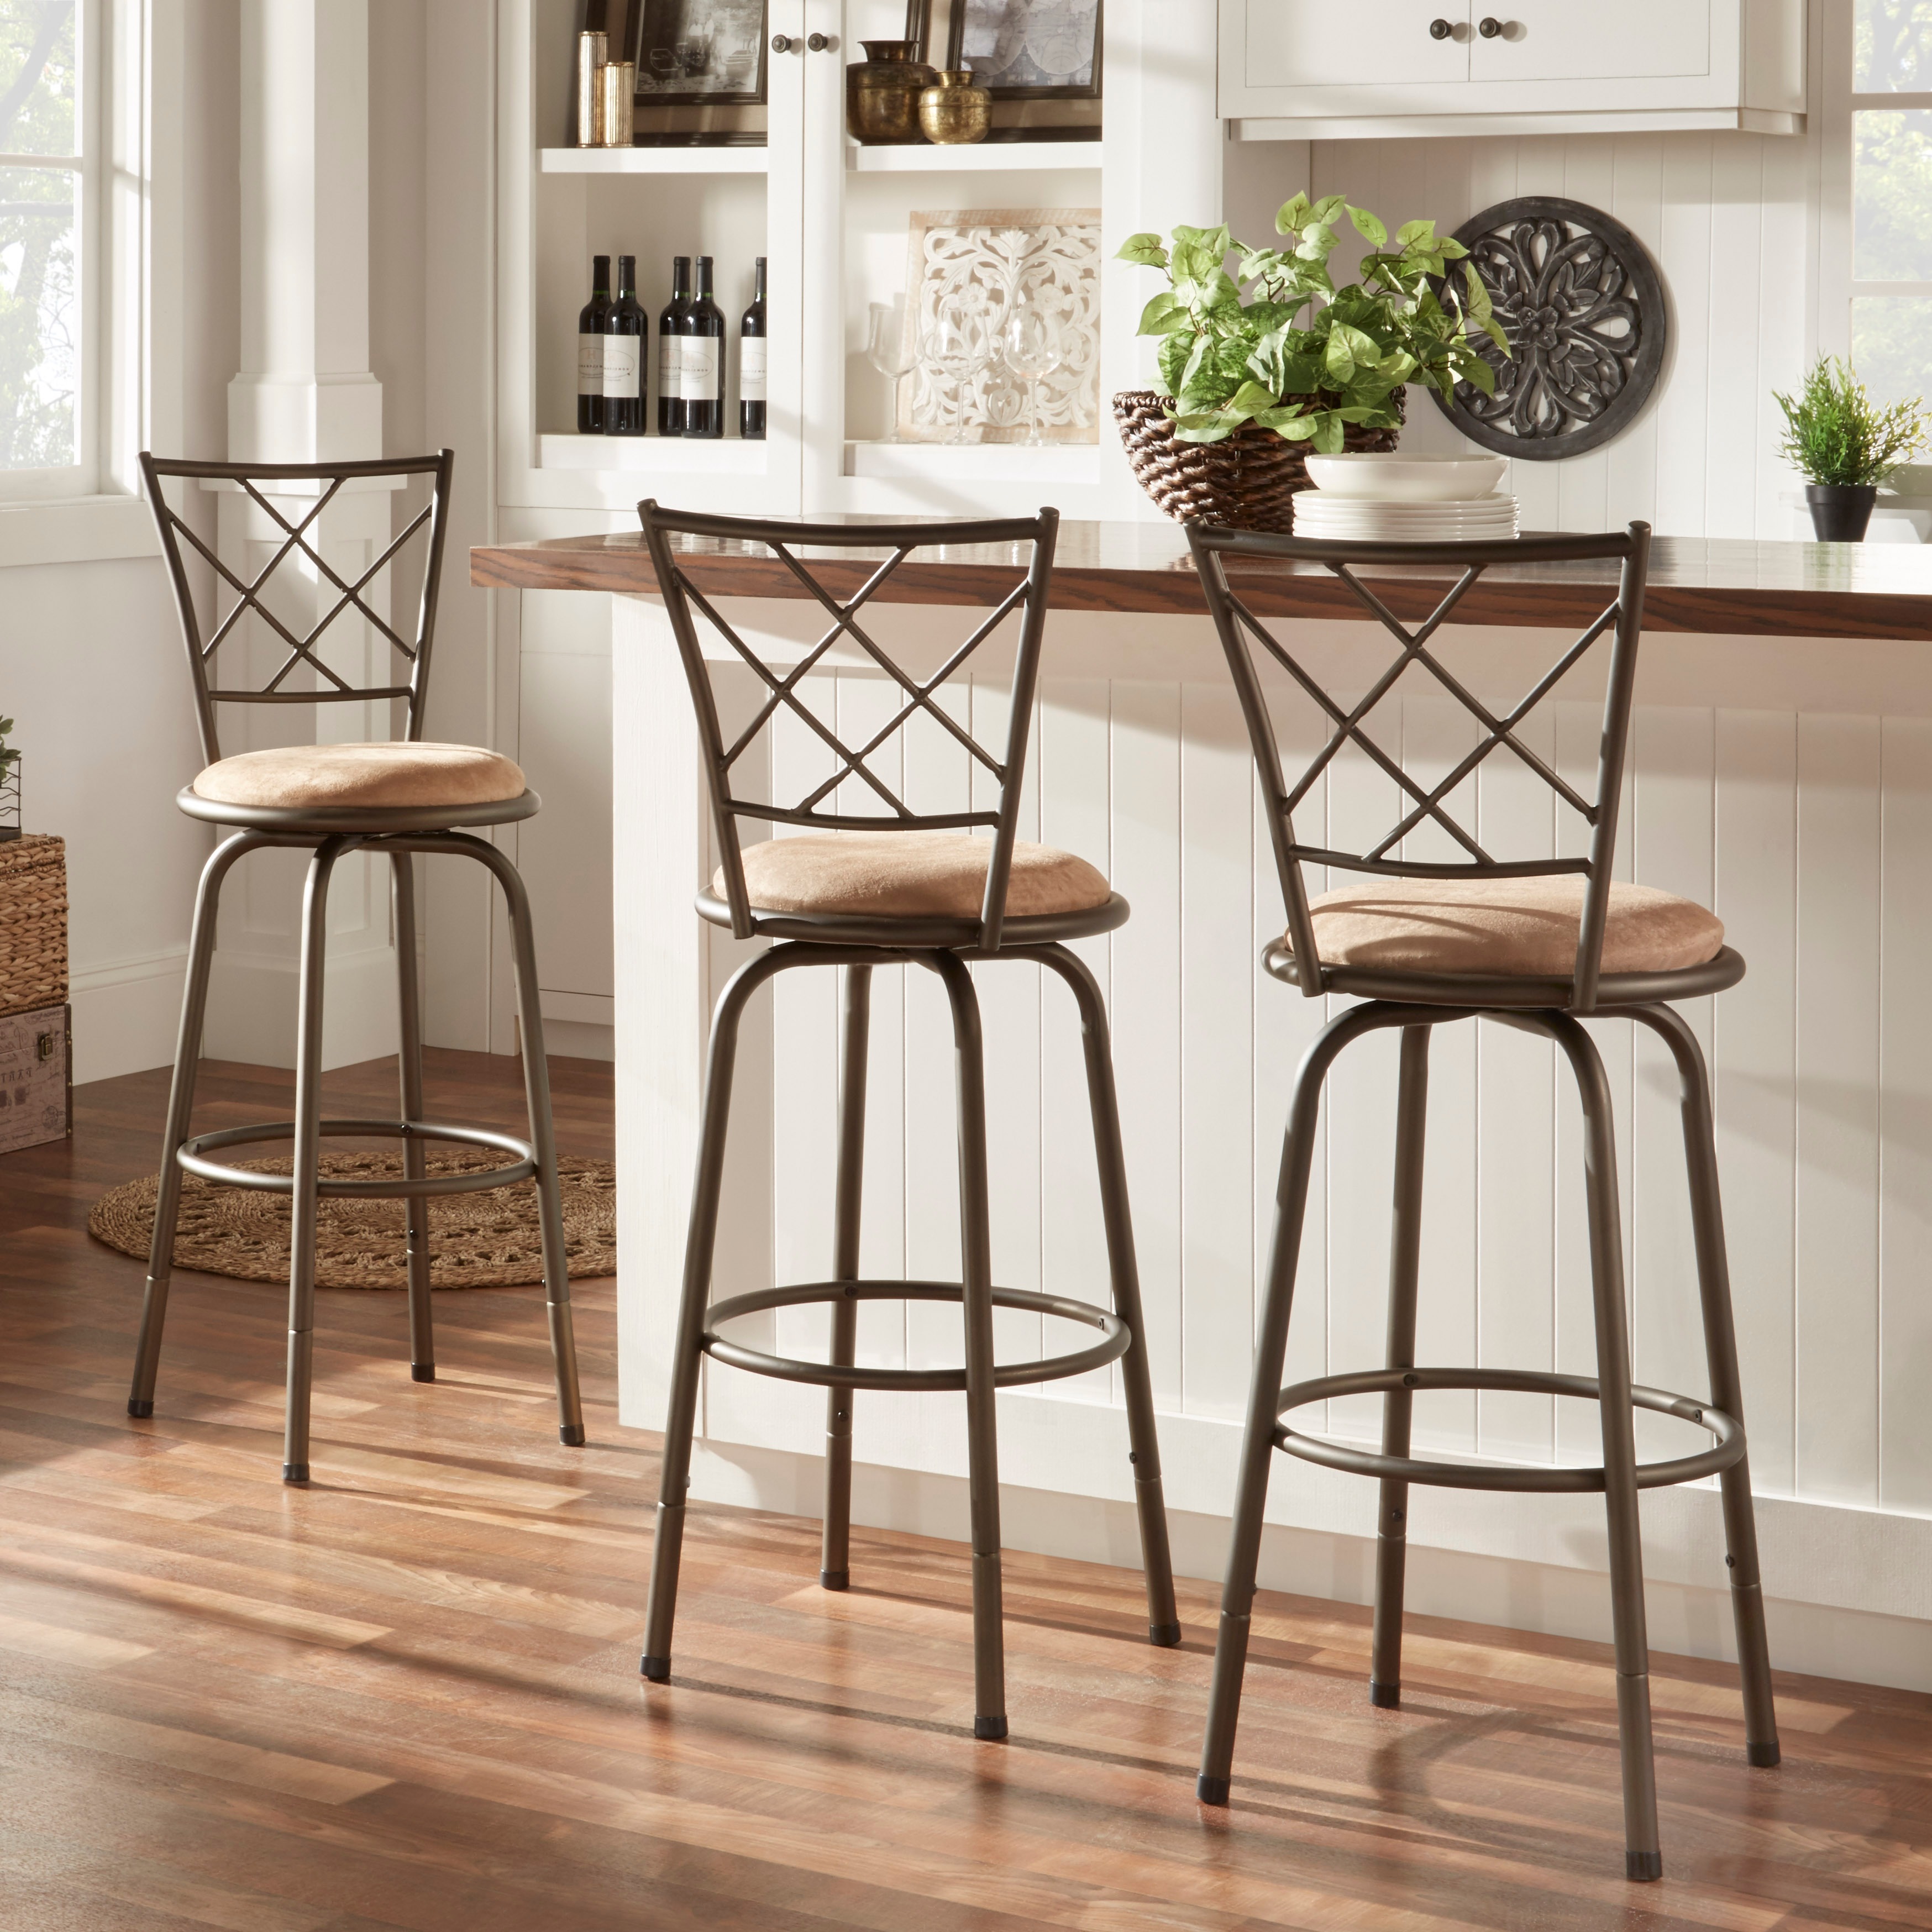 Avalon Cross Adjustable Swivel Stools Set Of 3 By Inspire Q Classic Kitchen Stool On Sale Overstock 4302142